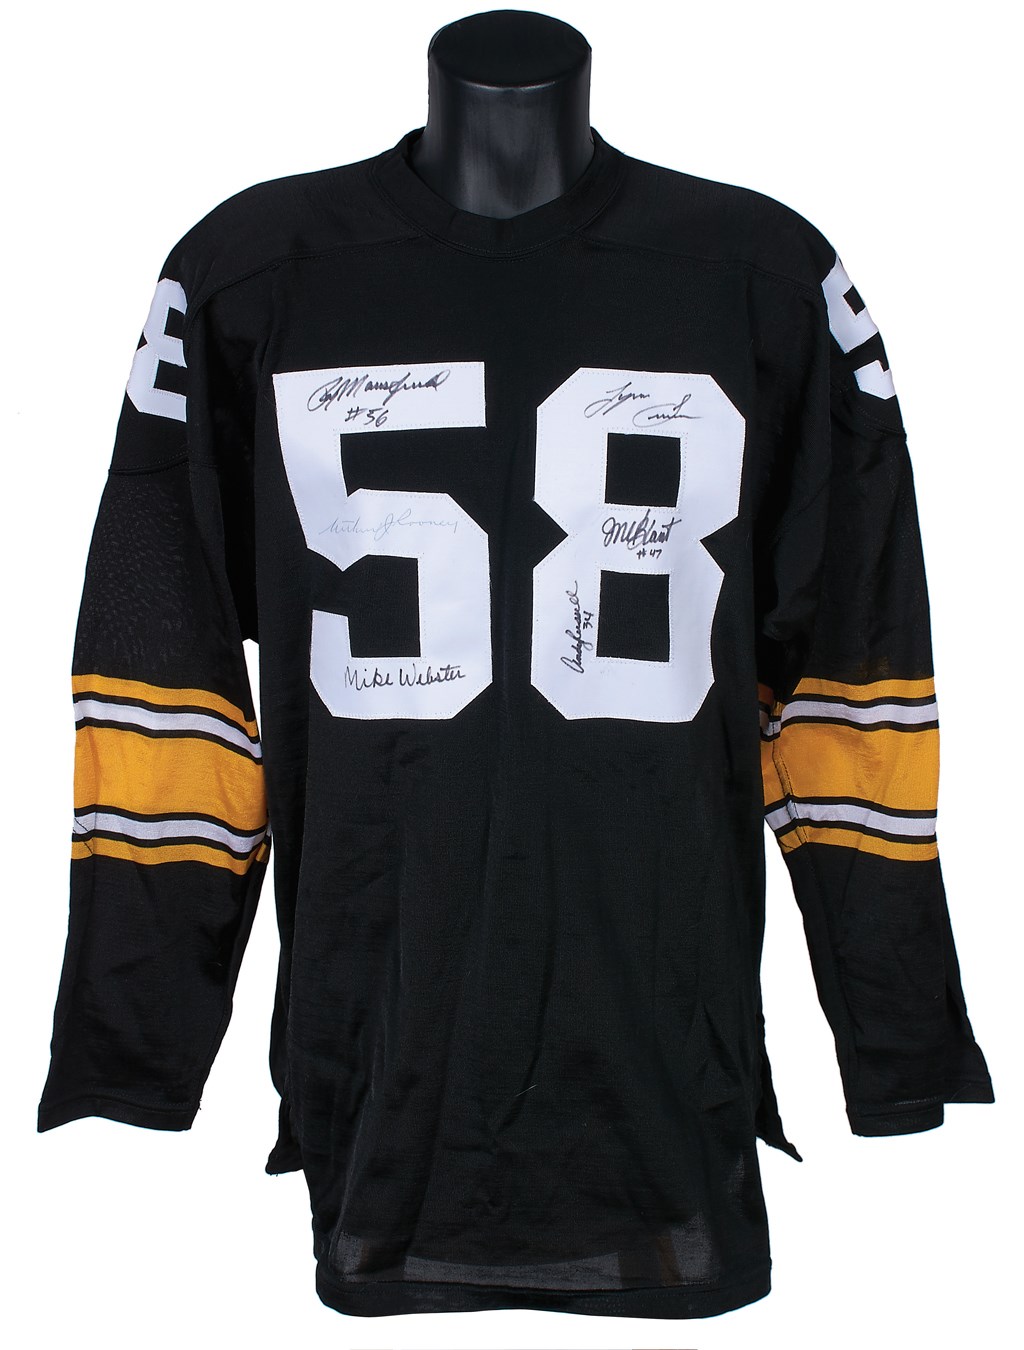 - Pittsburgh Steelers Hall of Famers and Stars Signed Jersey with Art Rooney